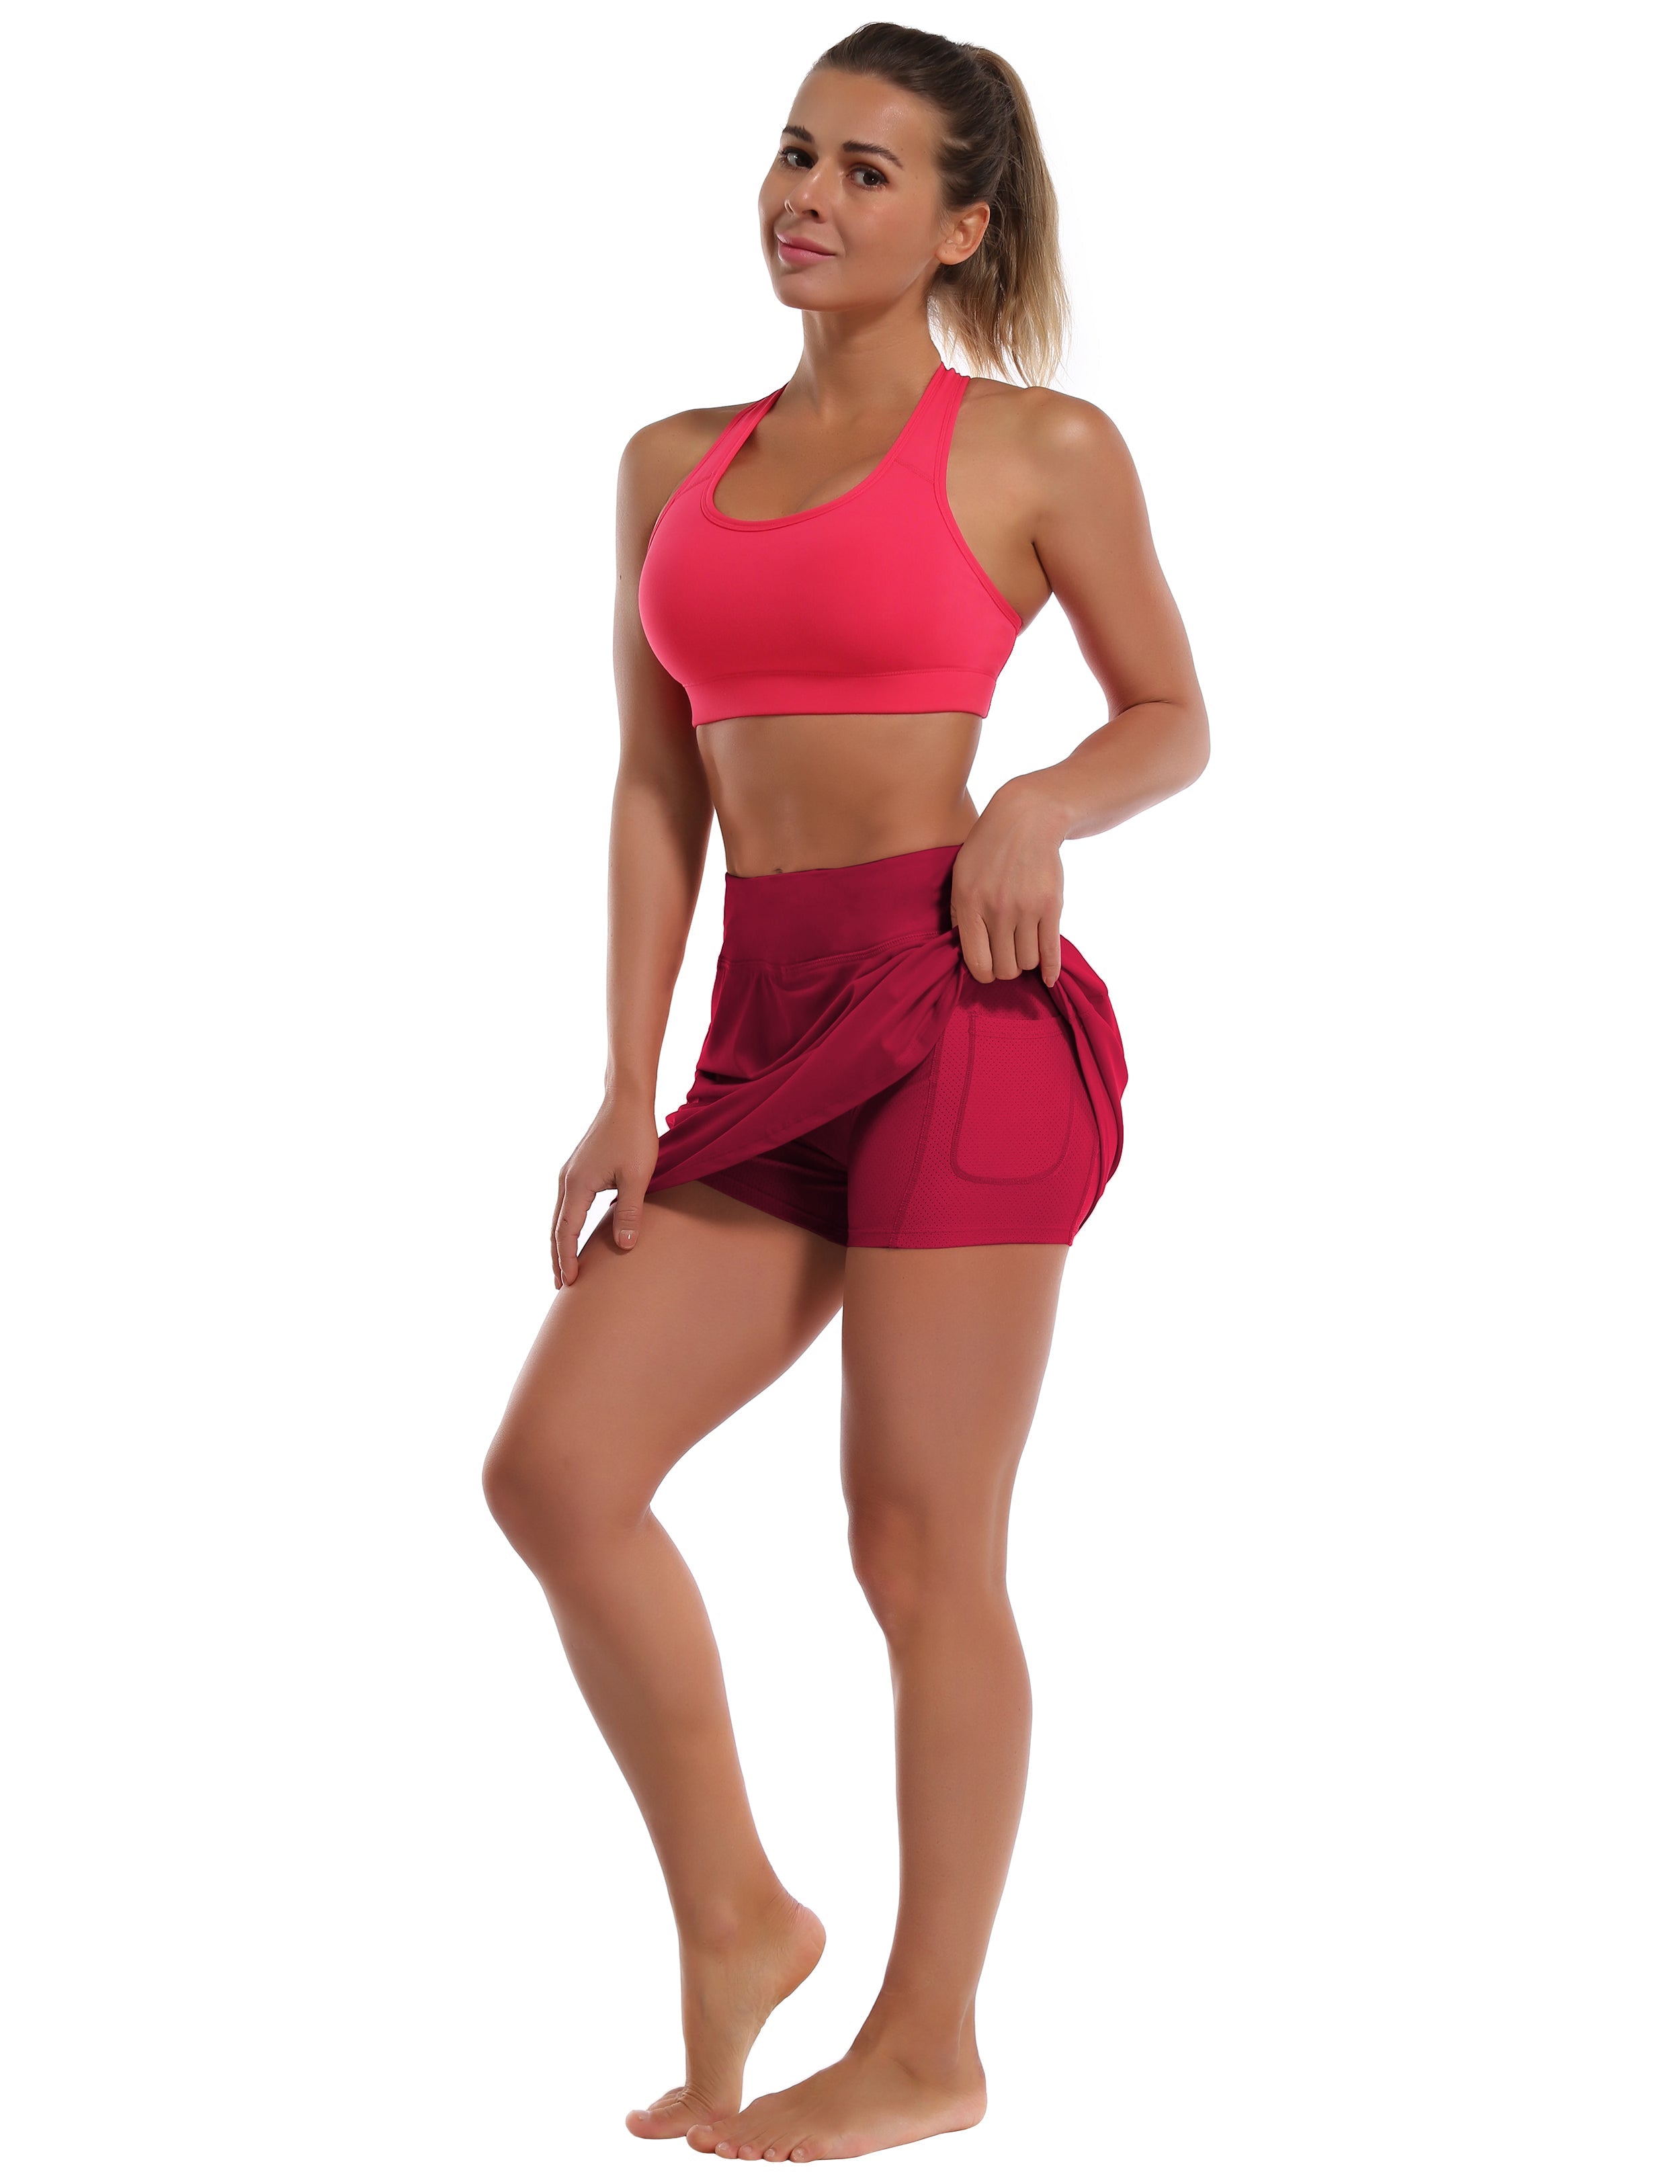 Athletic Tennis Golf Skort with Pockets Shorts rosecoral 80%Nylon/20%Spandex UPF 50+ sun protection Elastic closure Lightweight, Wrinkle Moisture wicking Quick drying Secure & comfortable two layer Hidden pocket